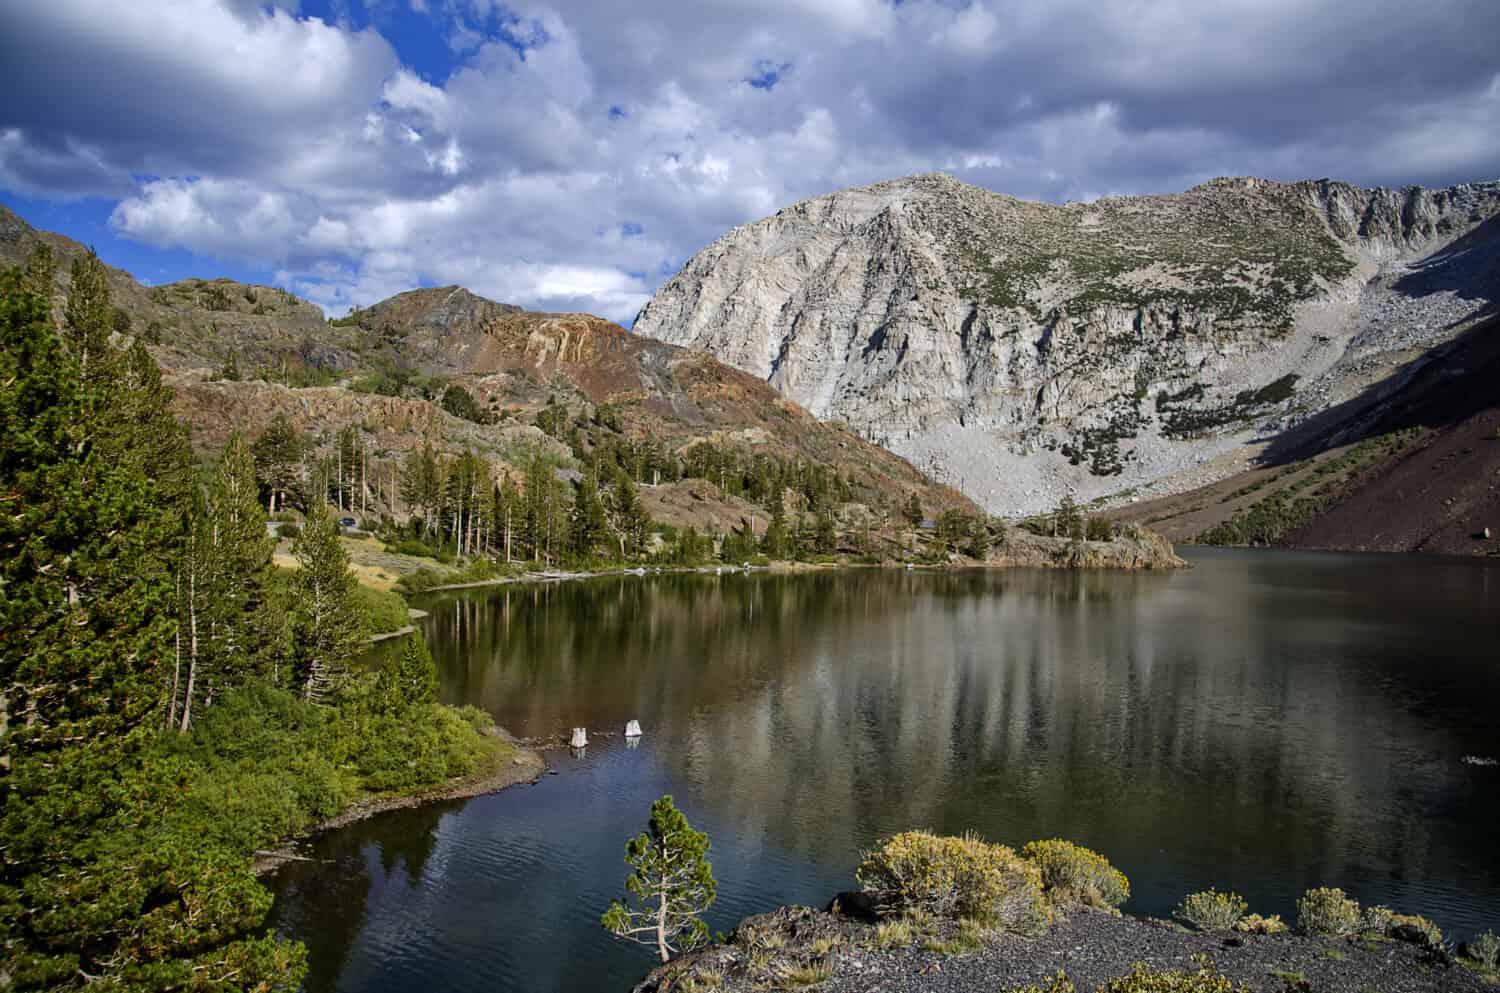 Ellery Lake, set in the upper Lee Vining Canyon,few miles from Yosemite National Parks east entrance. Ellery Lake offers beautiful Alpine scenery,great fighing and camping.